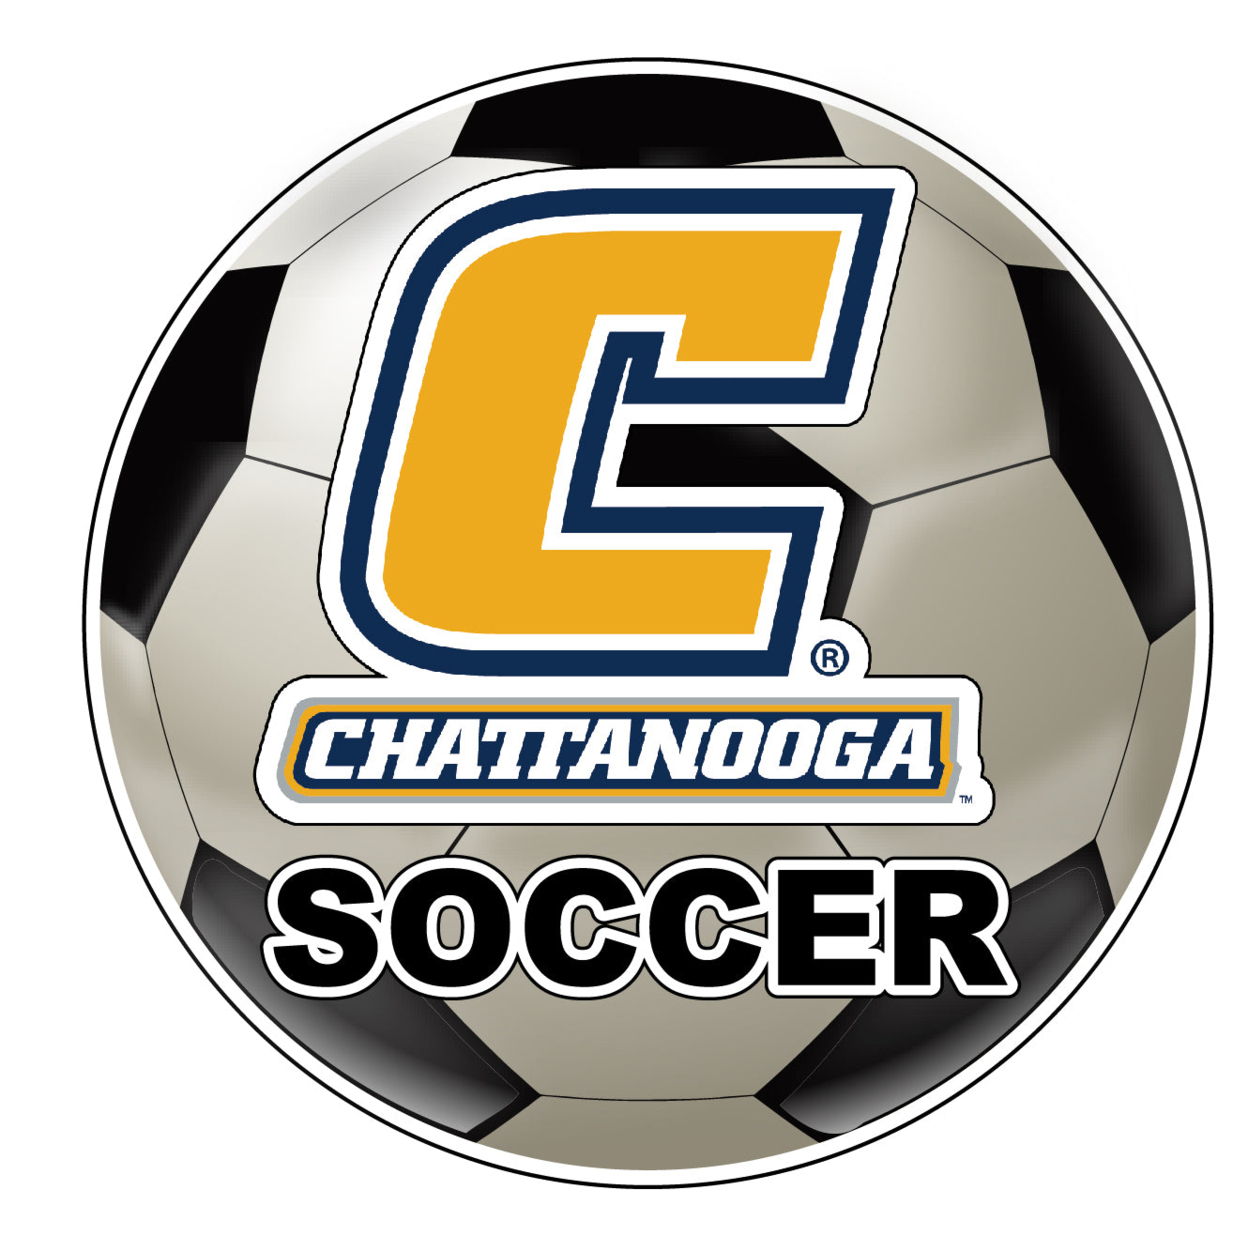 University Of Tennessee At Chattanooga 4-Inch Round Soccer Ball Vinyl Decal Sticker